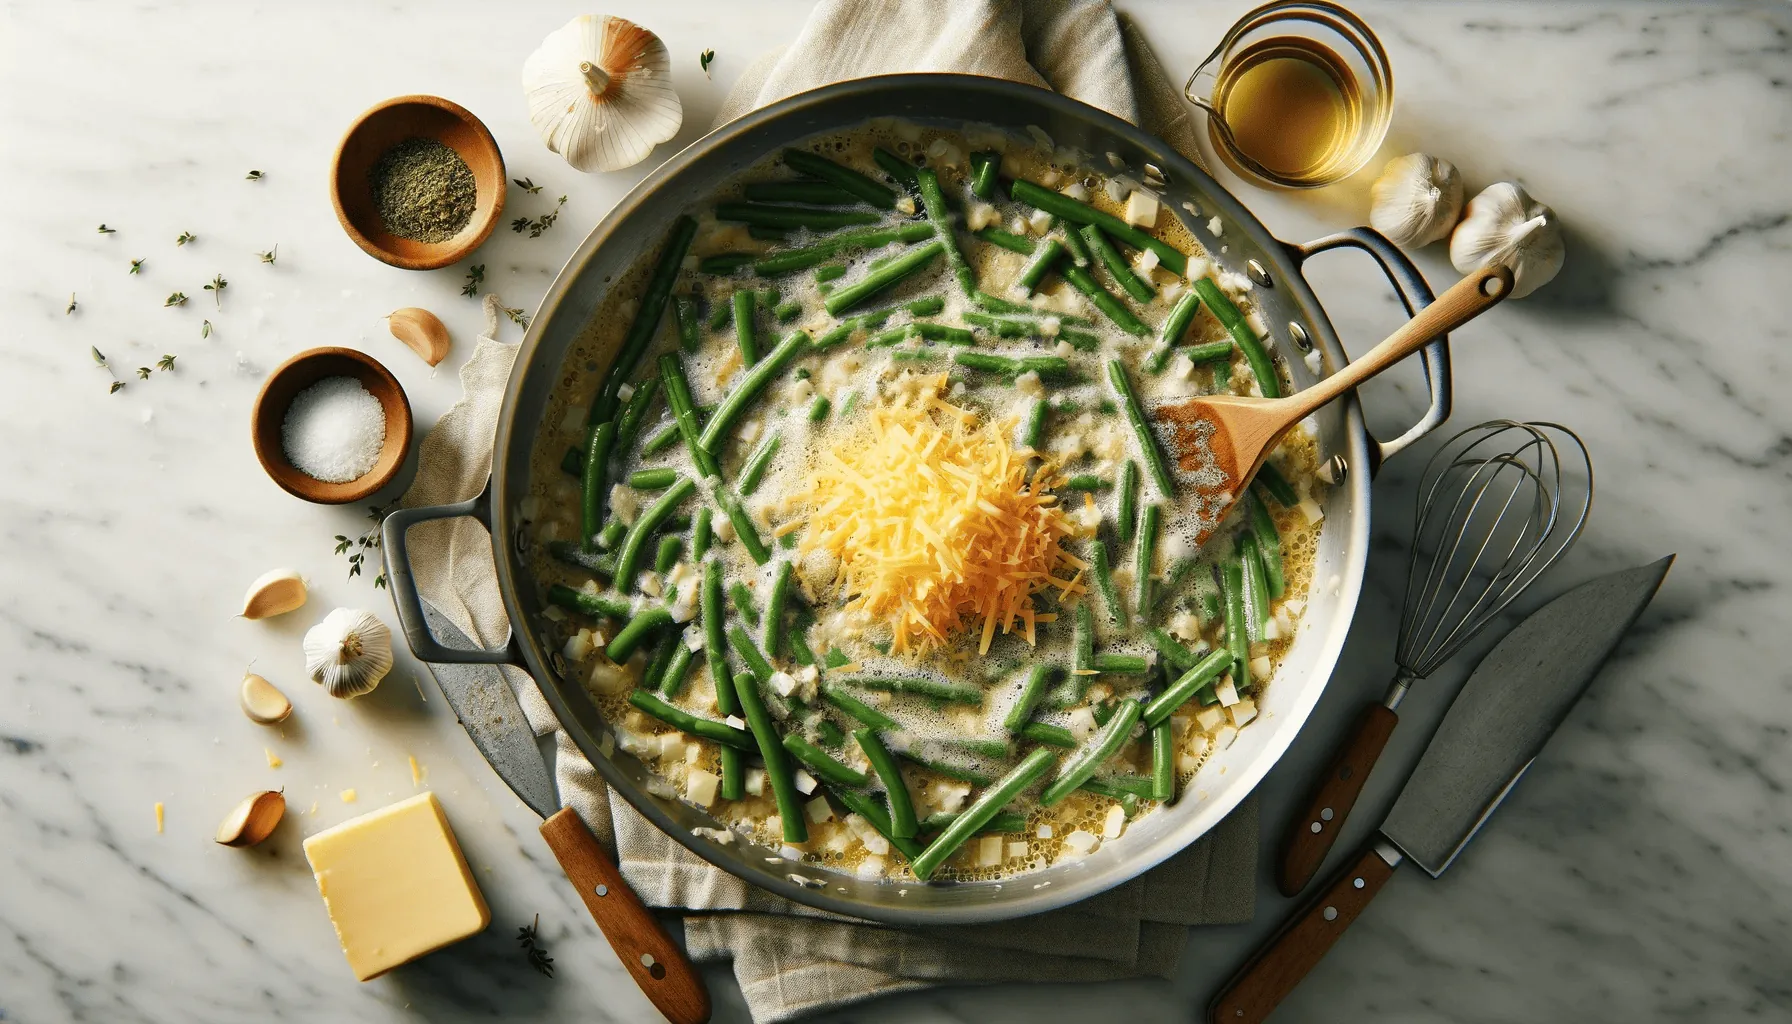 A skillet on a marble countertop with sautéed onions and garlic, a roux, and green beans in a creamy sauce, with wooden spoons